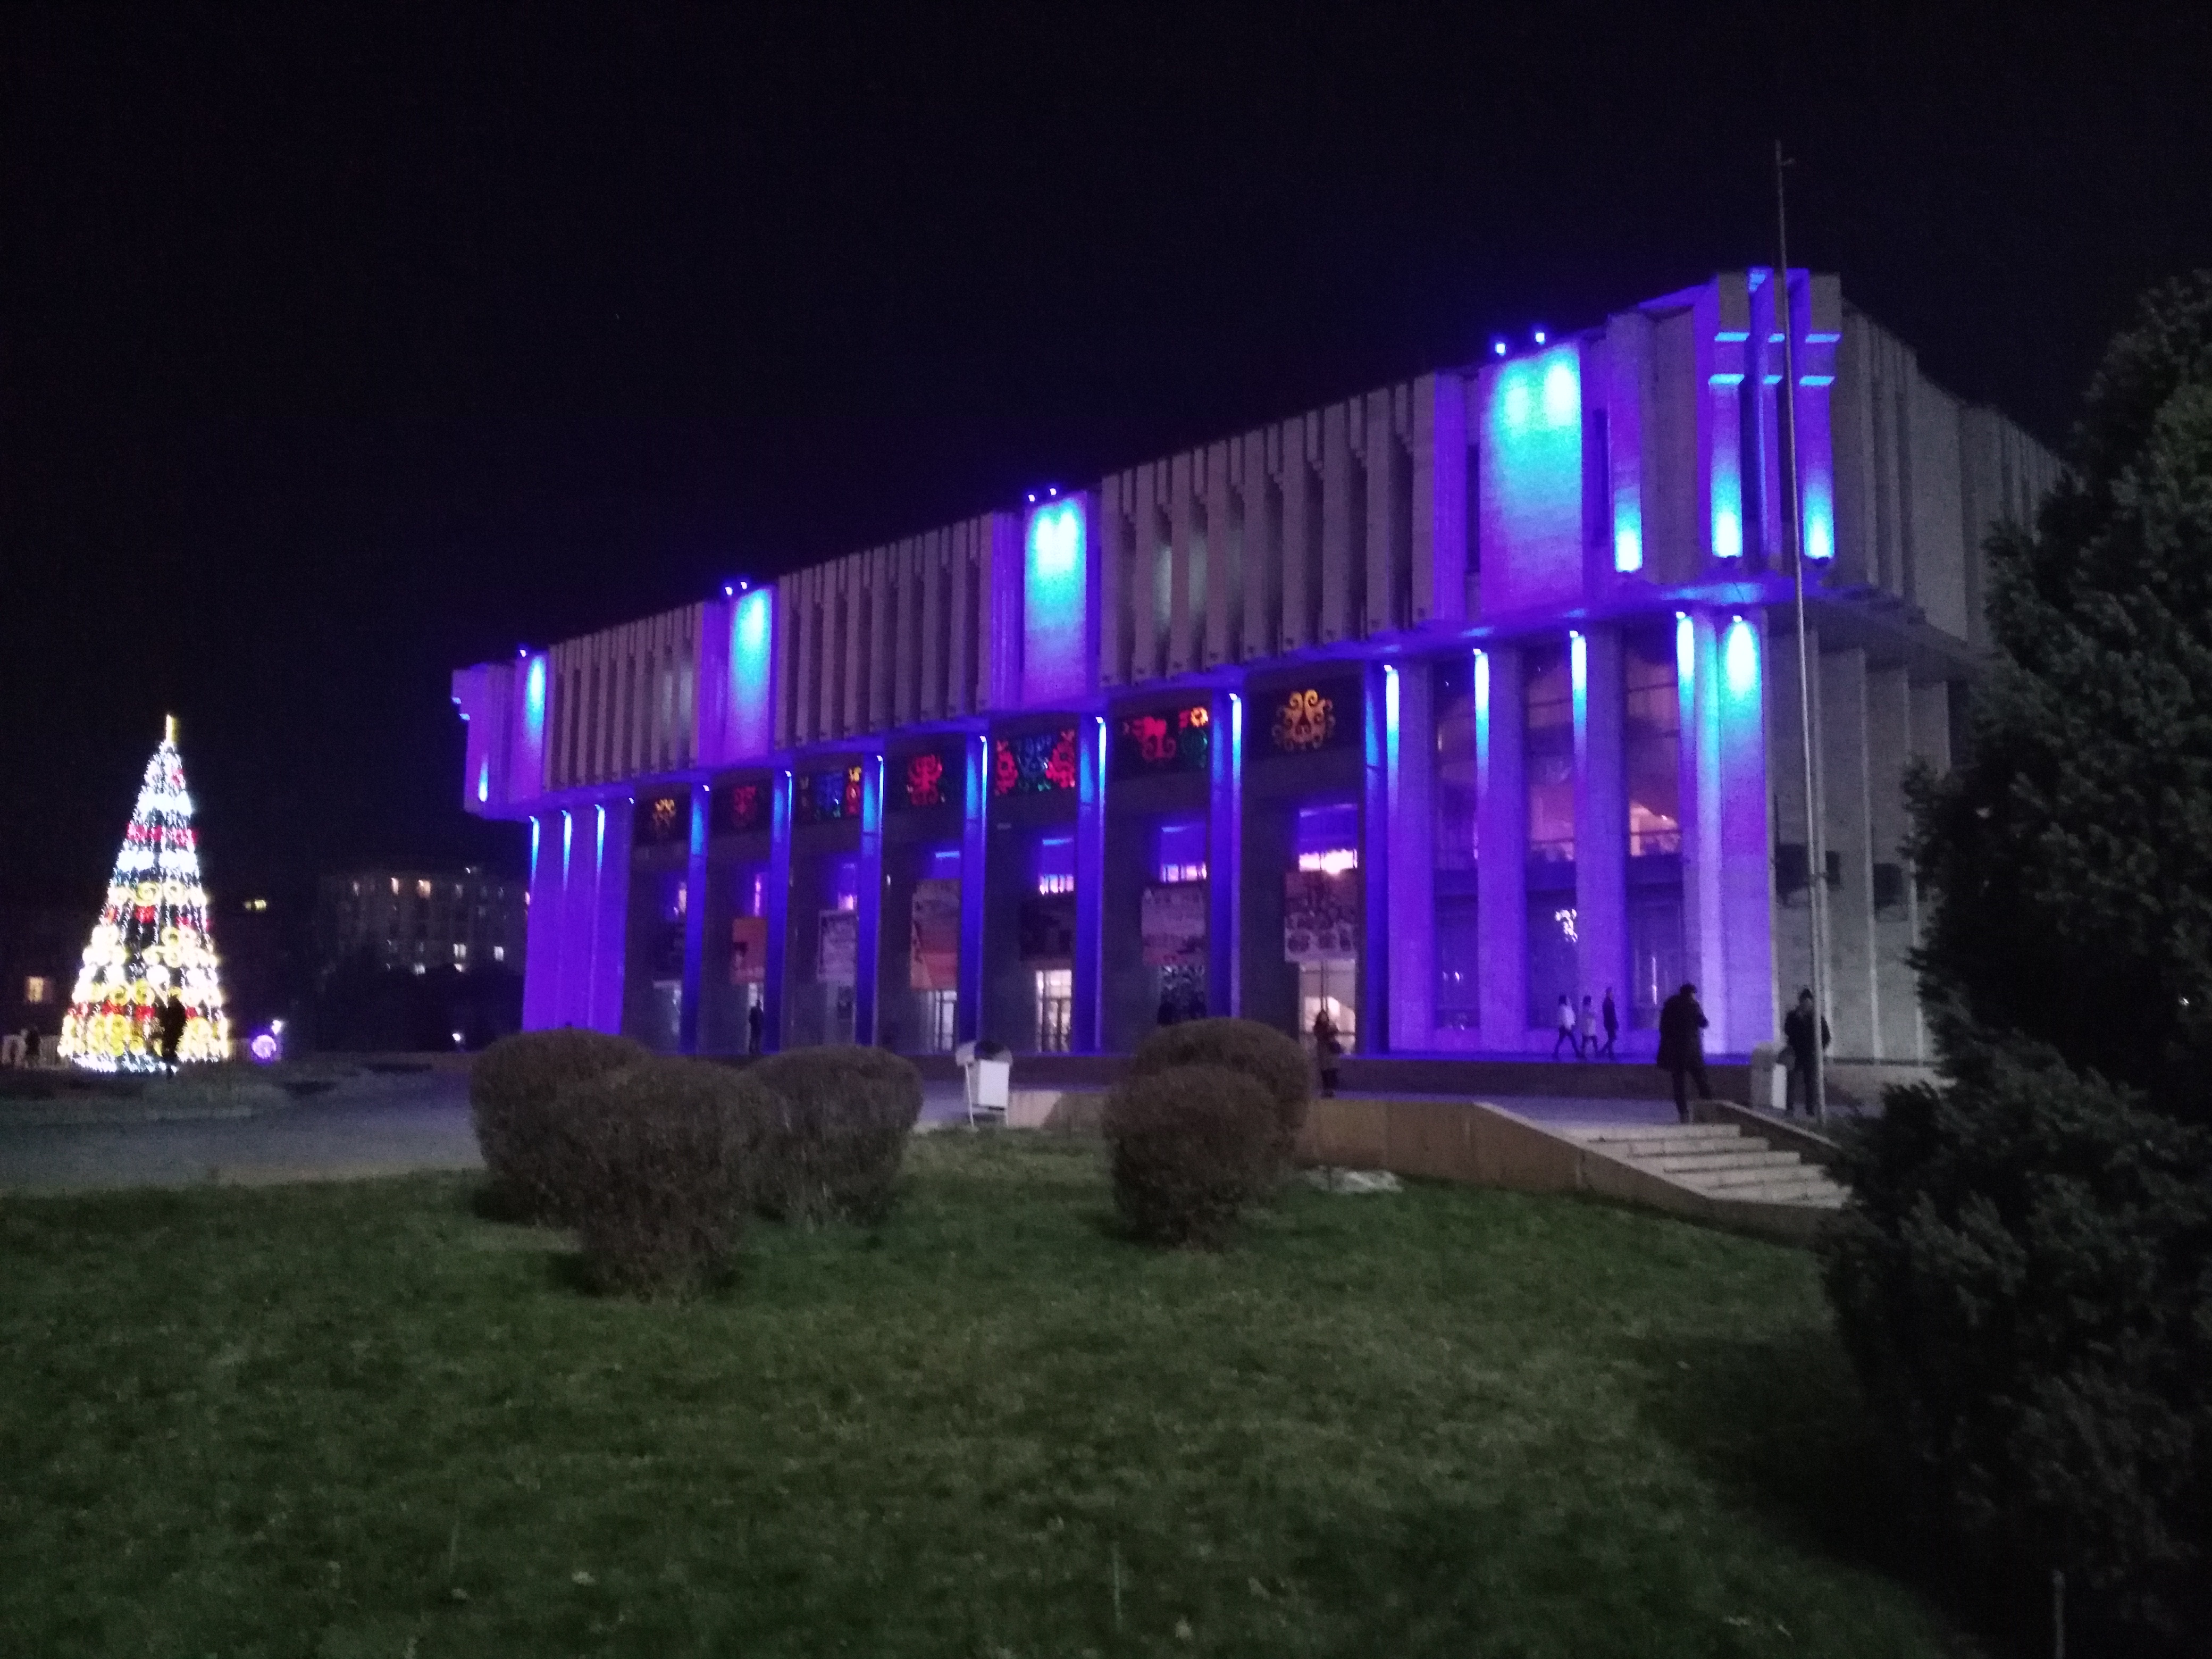 The Kyrgyz National Philharmonic illuminated by lights in anticipation of New Years.